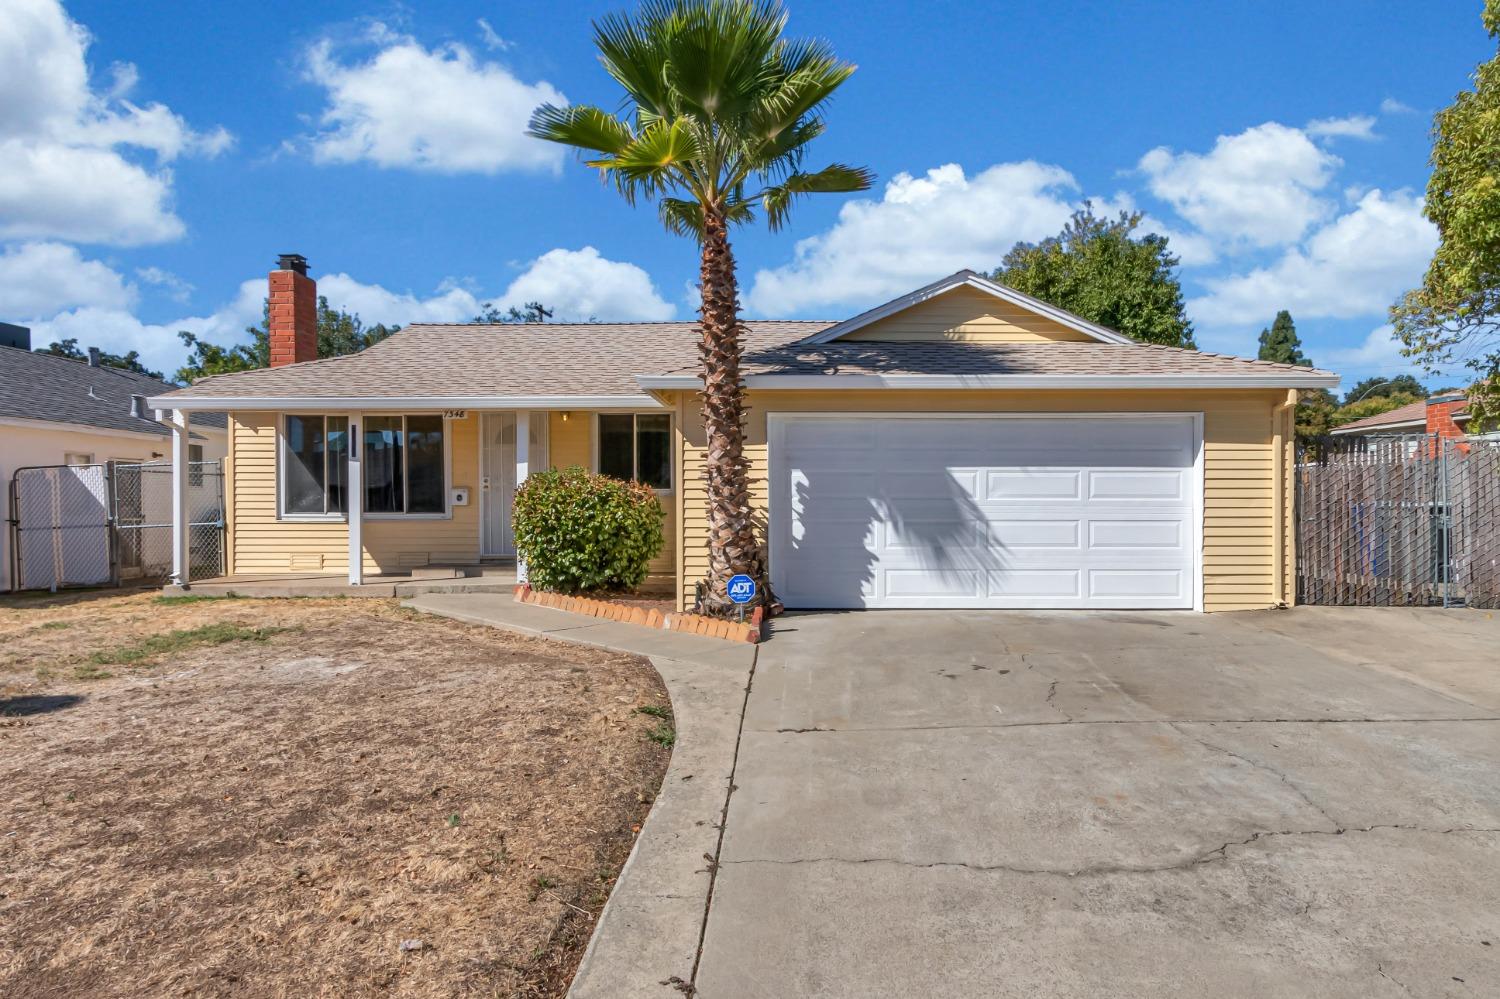 Welcome home!  This adorable 3-bedroom, 1.5-bathroom home is Move-In-Ready and is conveniently locat